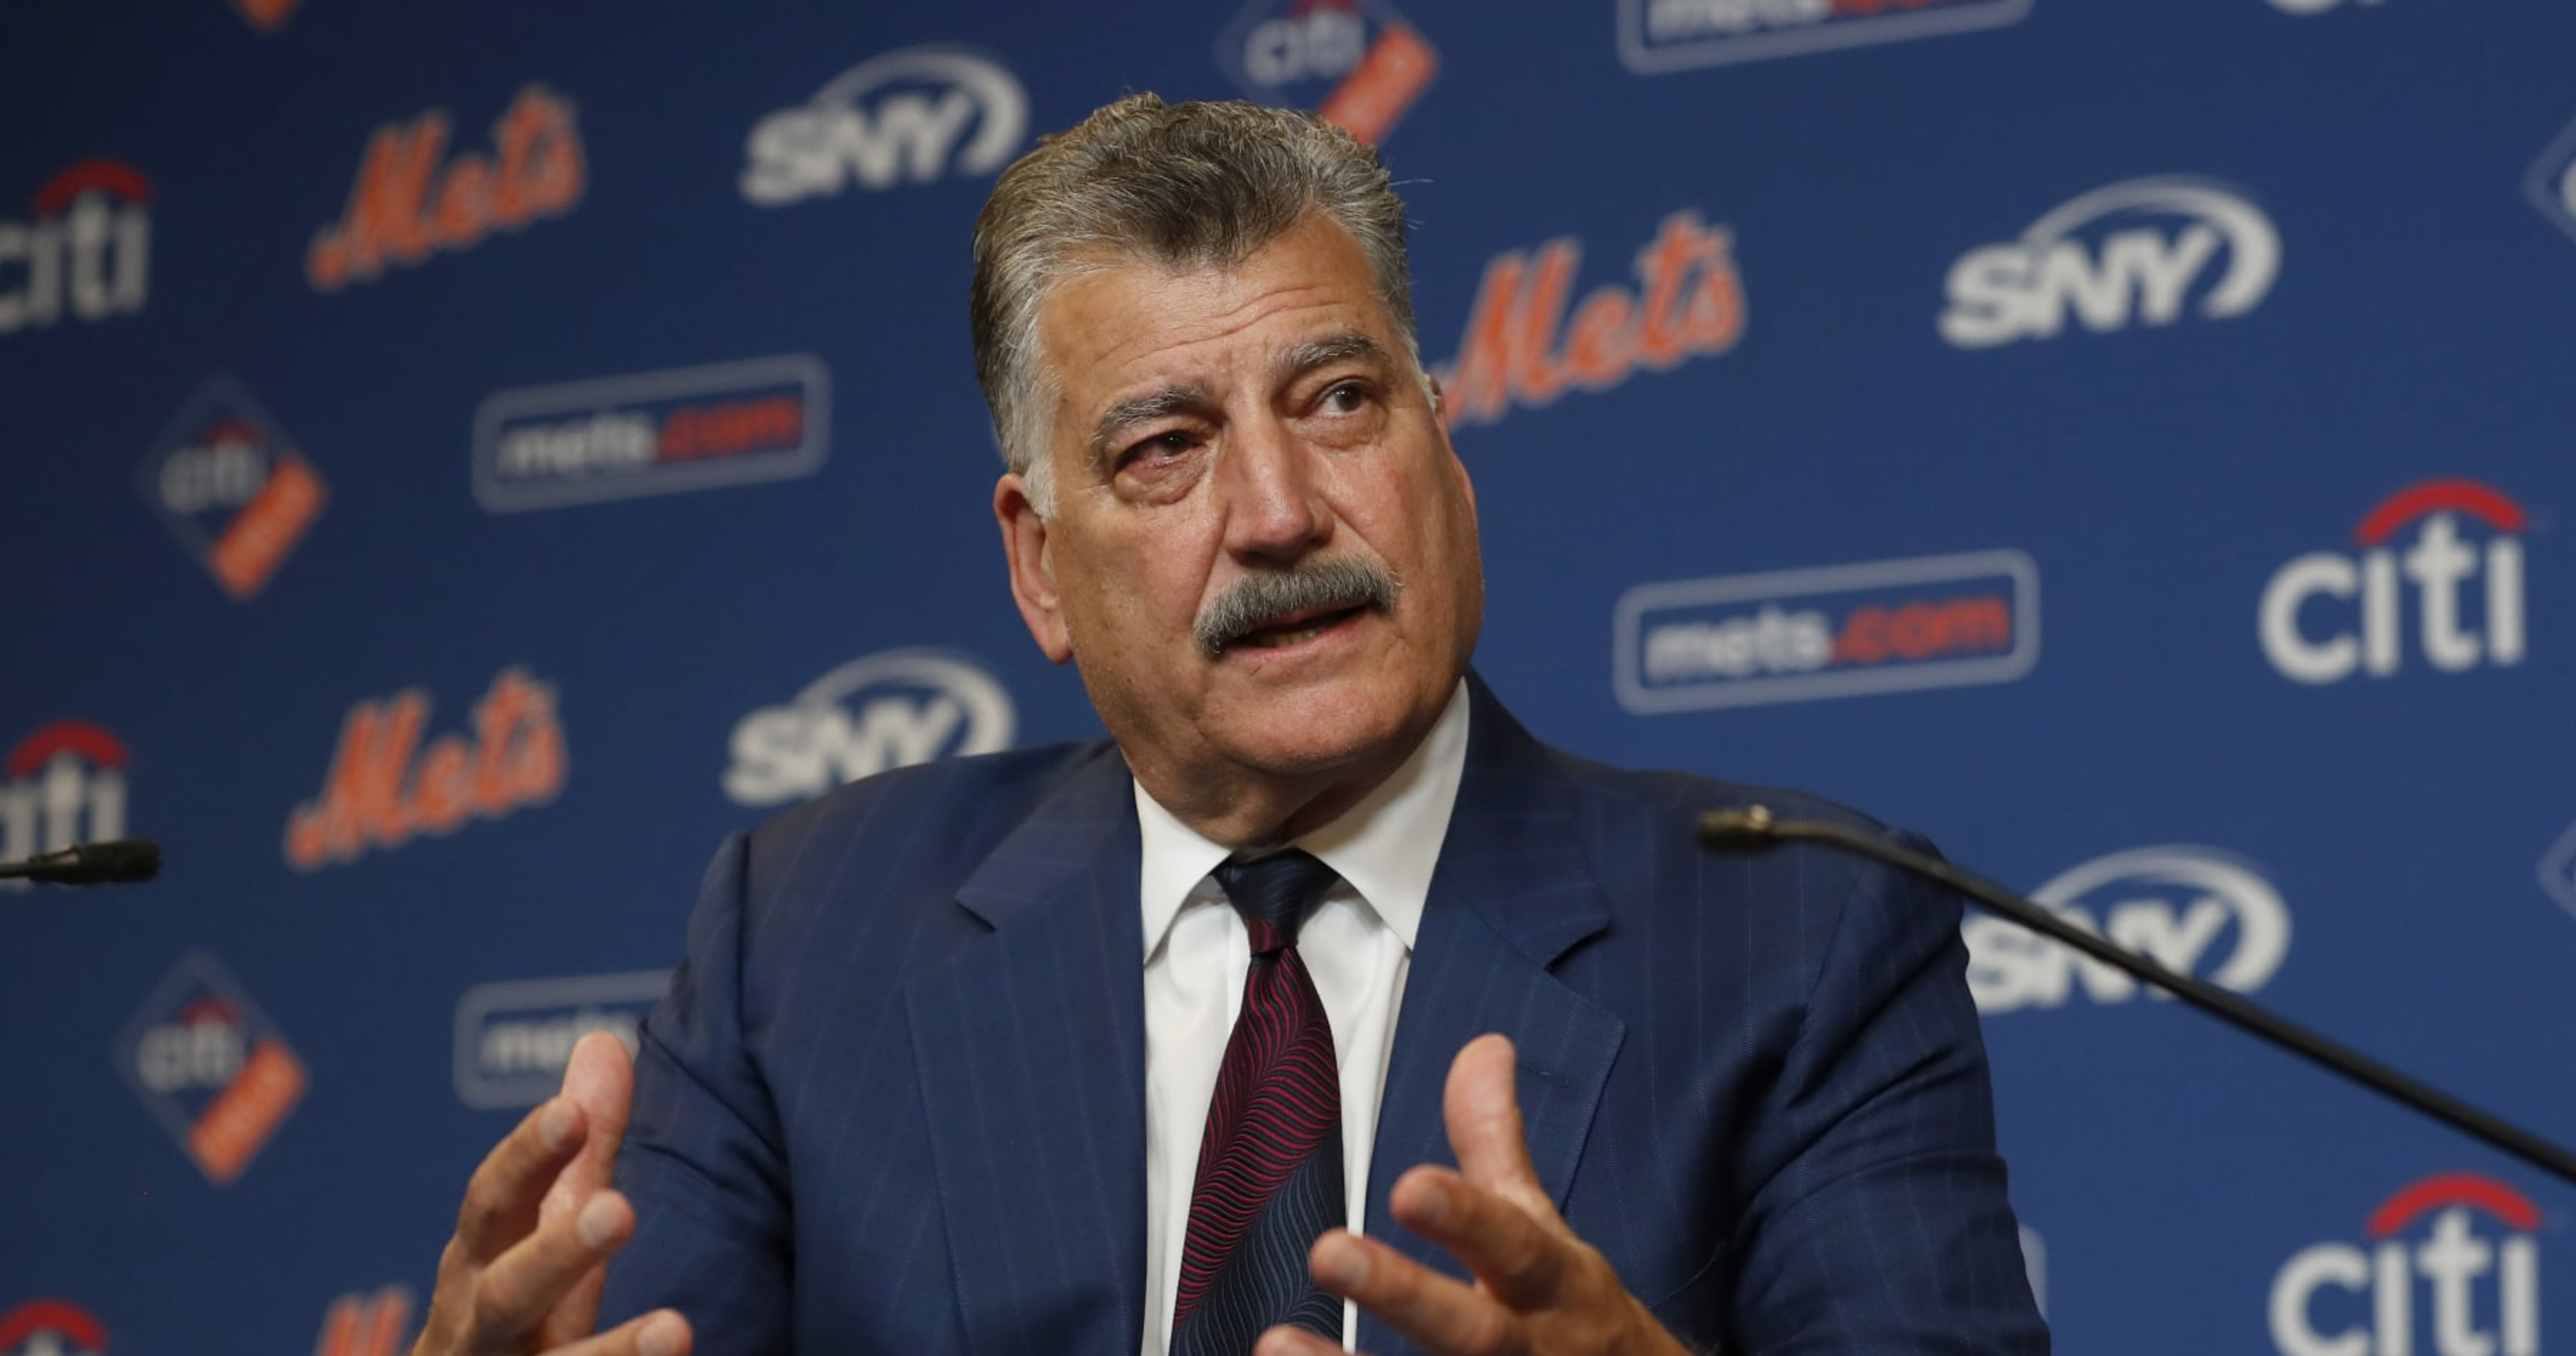 Sending a get well soon & best wishes to our very own Keith Hernandez -  Mets legend and SNY analyst Keith Hernandez to miss rest of the season due  to shoulder injury